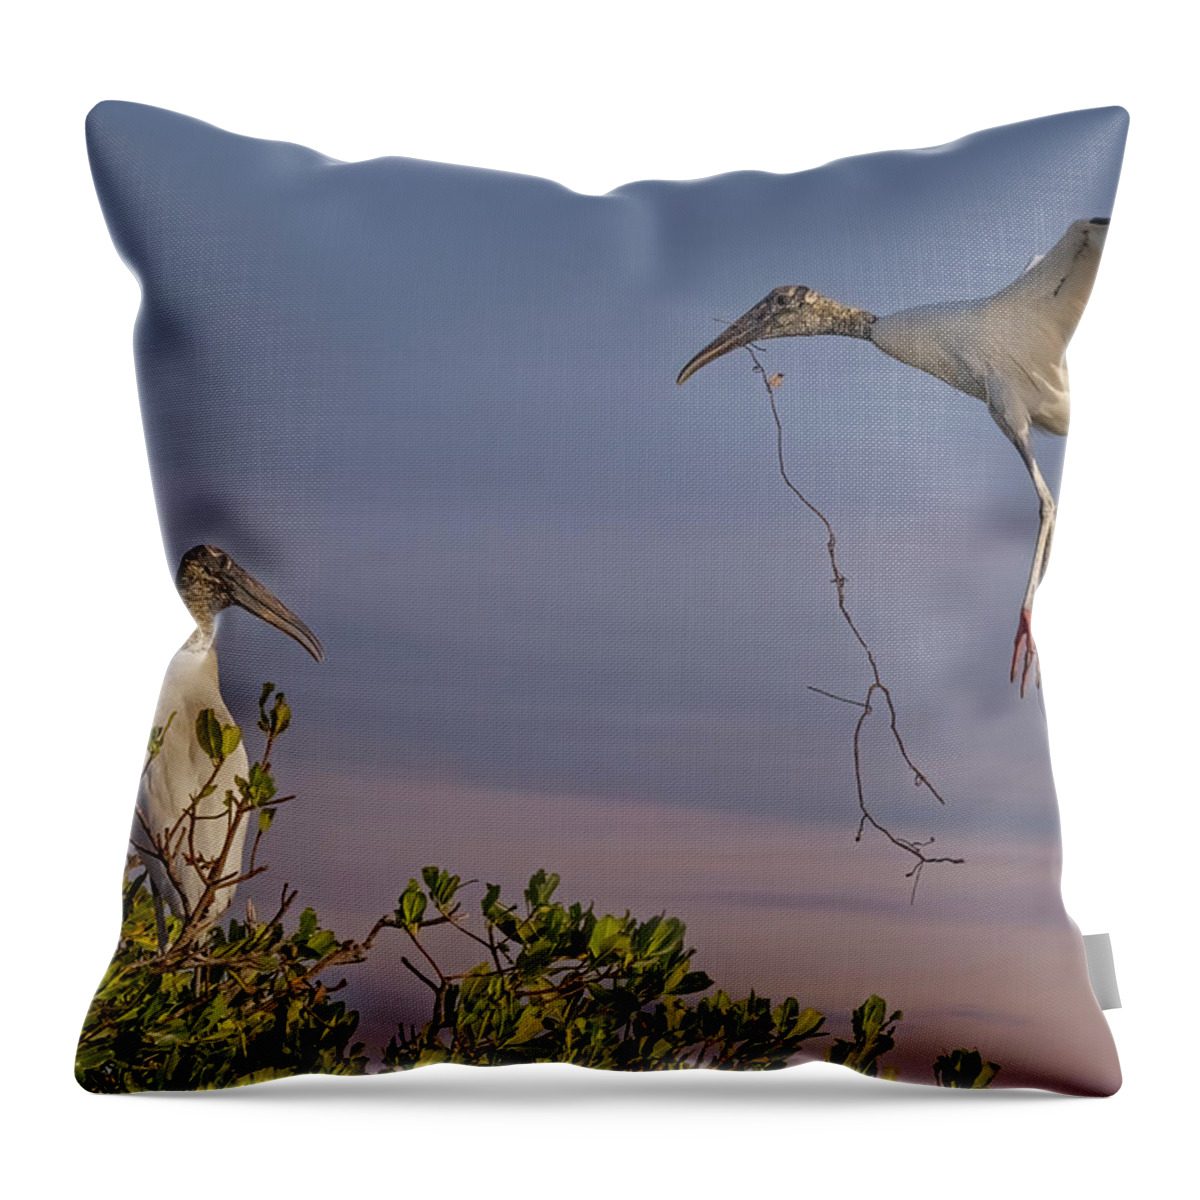 Wood Stork Throw Pillow featuring the photograph Wood Stork Returns To Nest by Susan Candelario